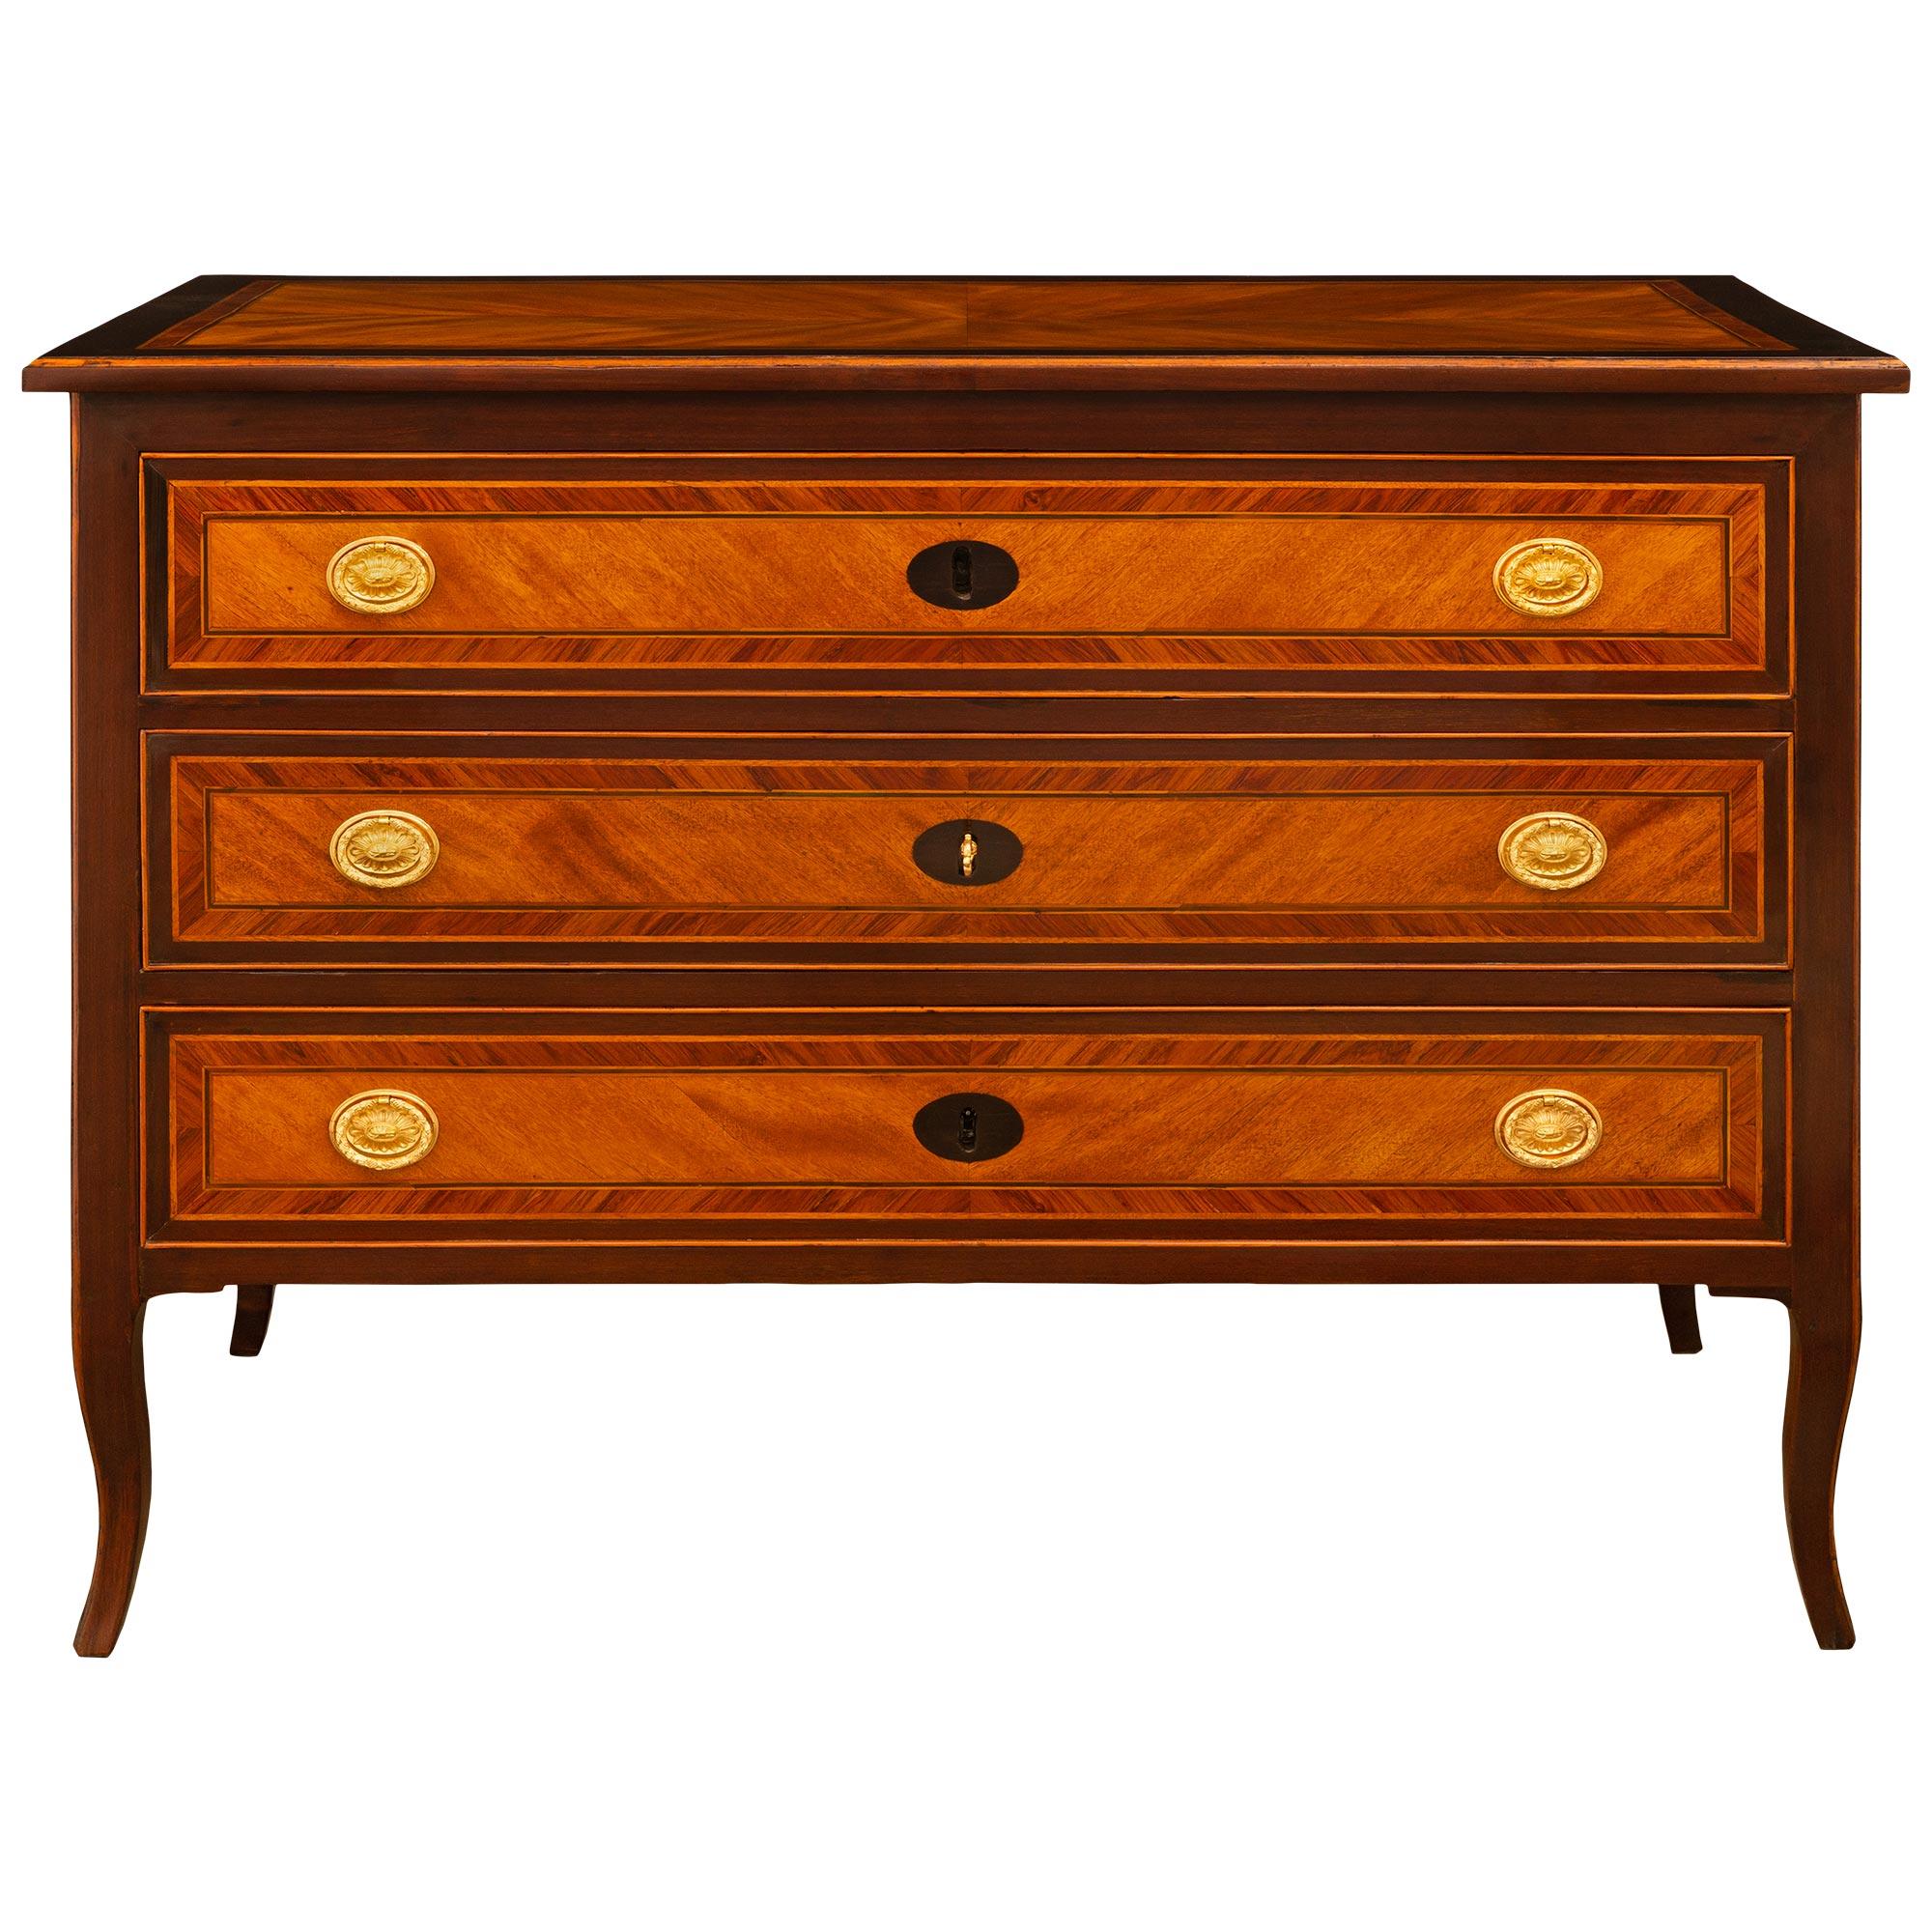 Italian Transitional Period Mahogany, Tulipwood, Cherrywood And Ormolu Commode For Sale 6